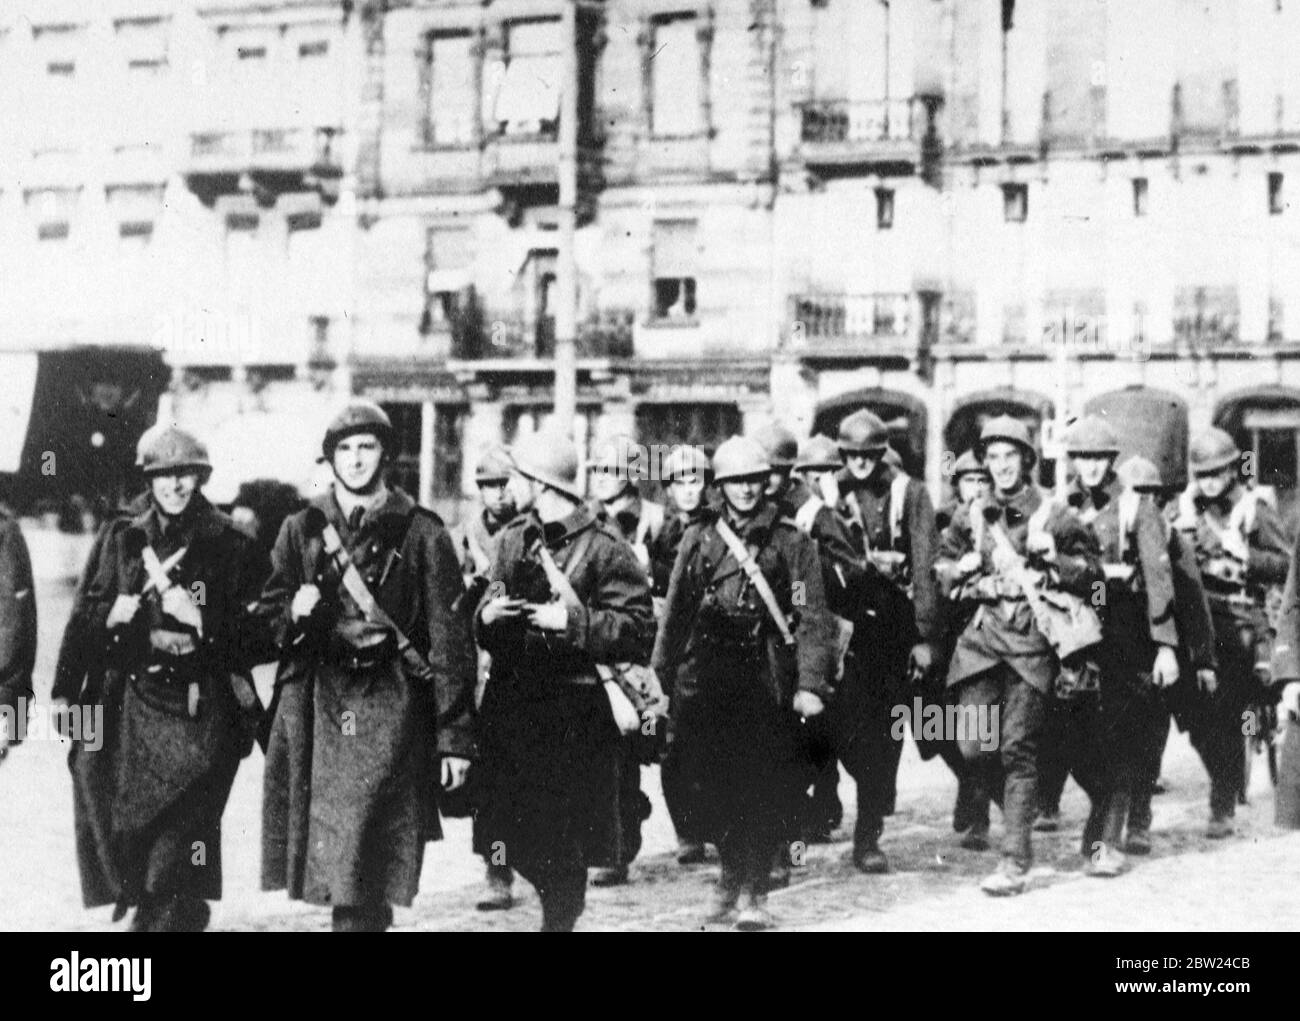 France sends more troops to Maginot Line. Following the decision of the Cabinet that France will make no further concessions in the Czech crisis, troops are being sent out to the Maginot Line on the Franco German frontier. New mobilisation orders may be issued. Photo shows, French troops in steel helmets, marching through Strasberg, the strategic frontier town on the Maginot Line. 26 September 1938 Stock Photo